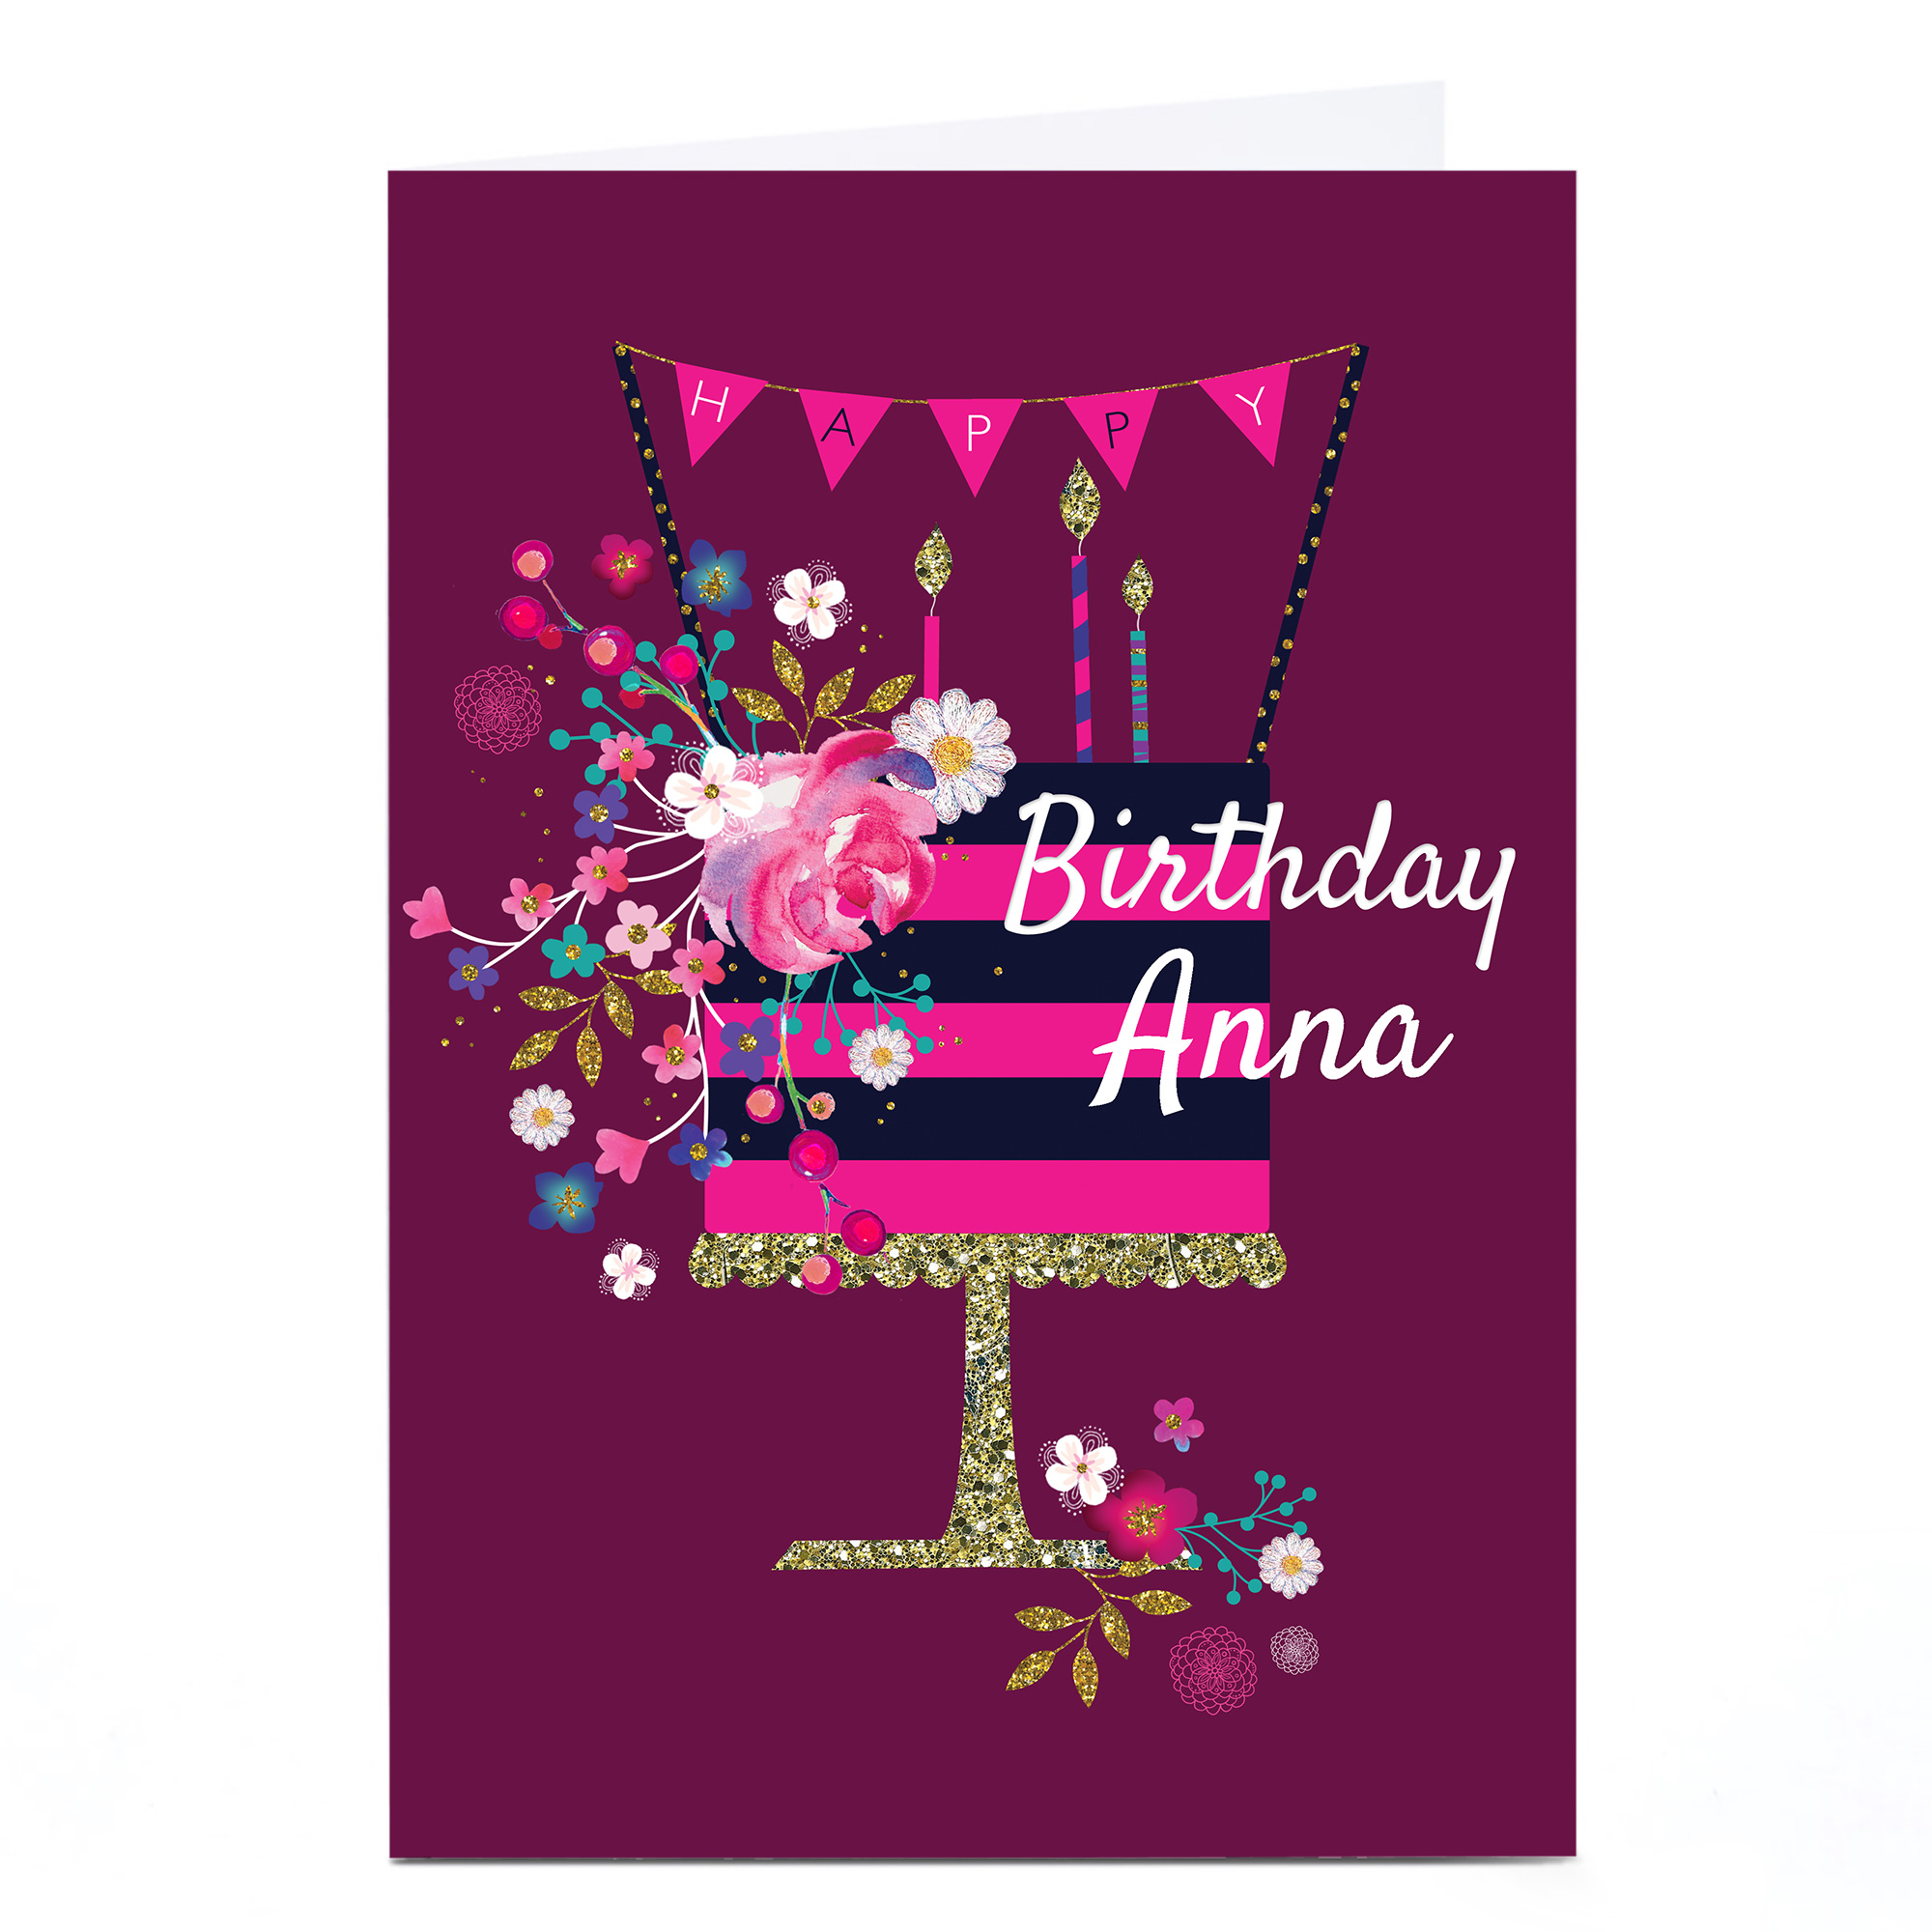 Personalised Kerry Spurling Birthday Card - Cake [Any Message]